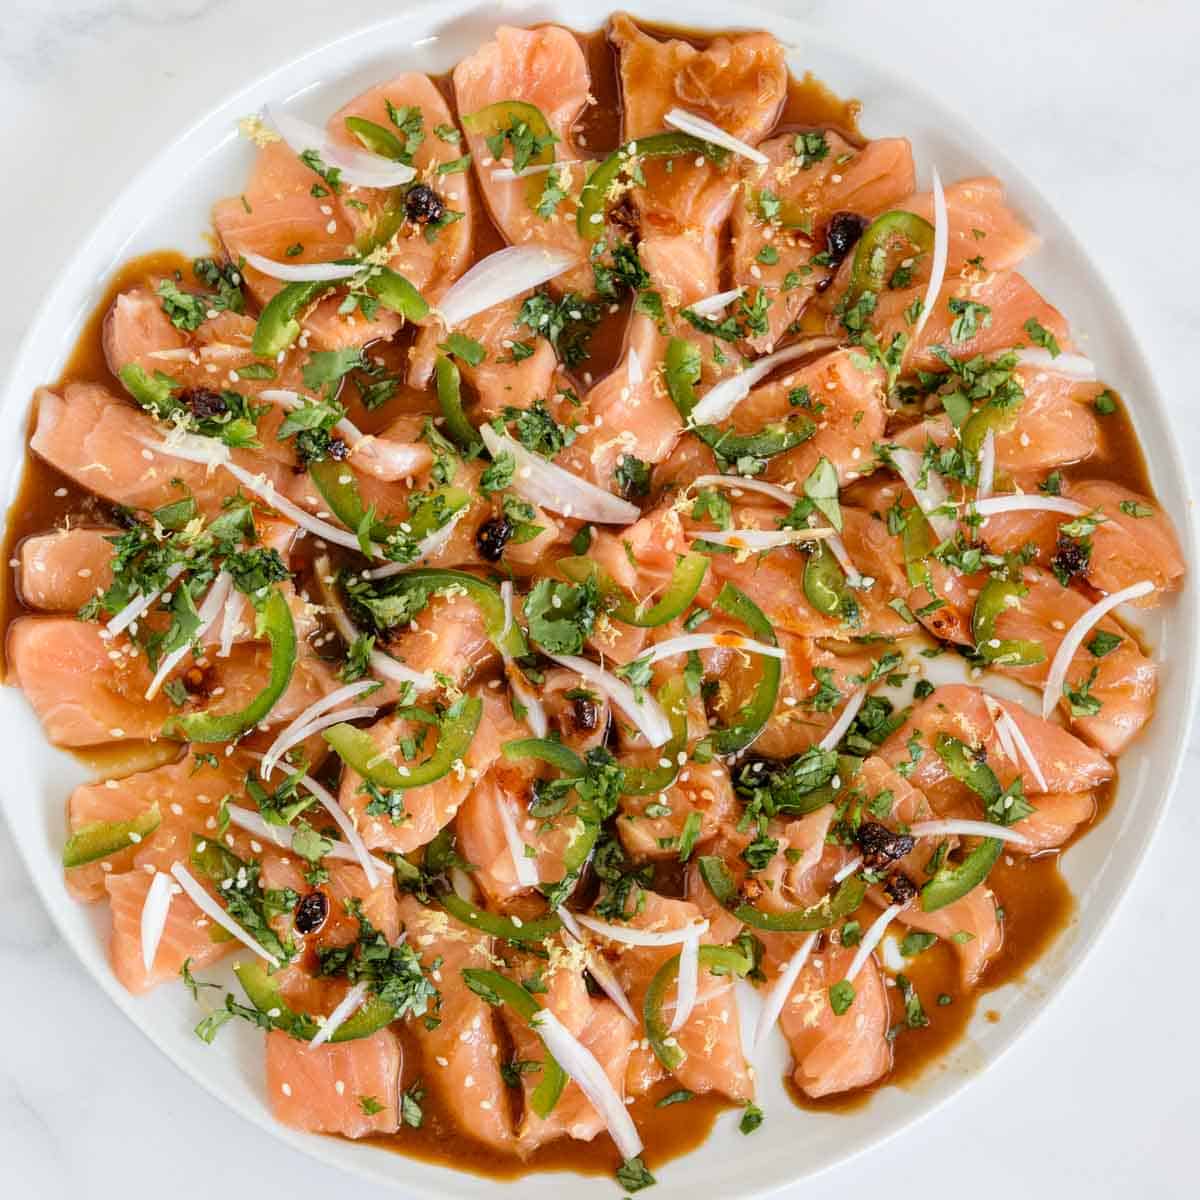 fancy plate of sliced wild salmon topped with shallot, jalapeno, herbs and sauces